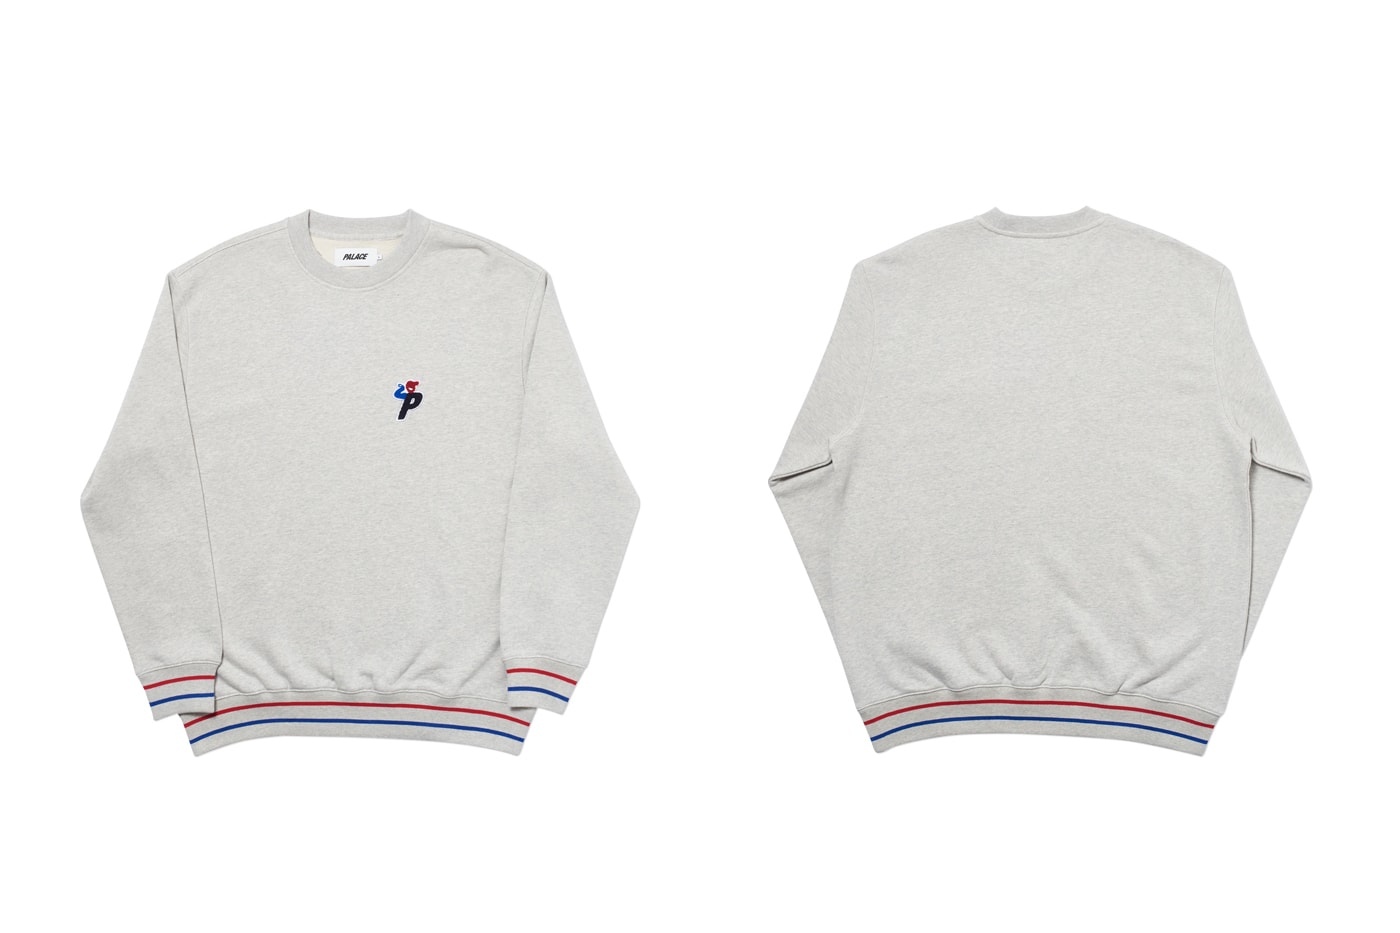 palace spring summer collection release drop 3 date t-shirts hoodies jackets 